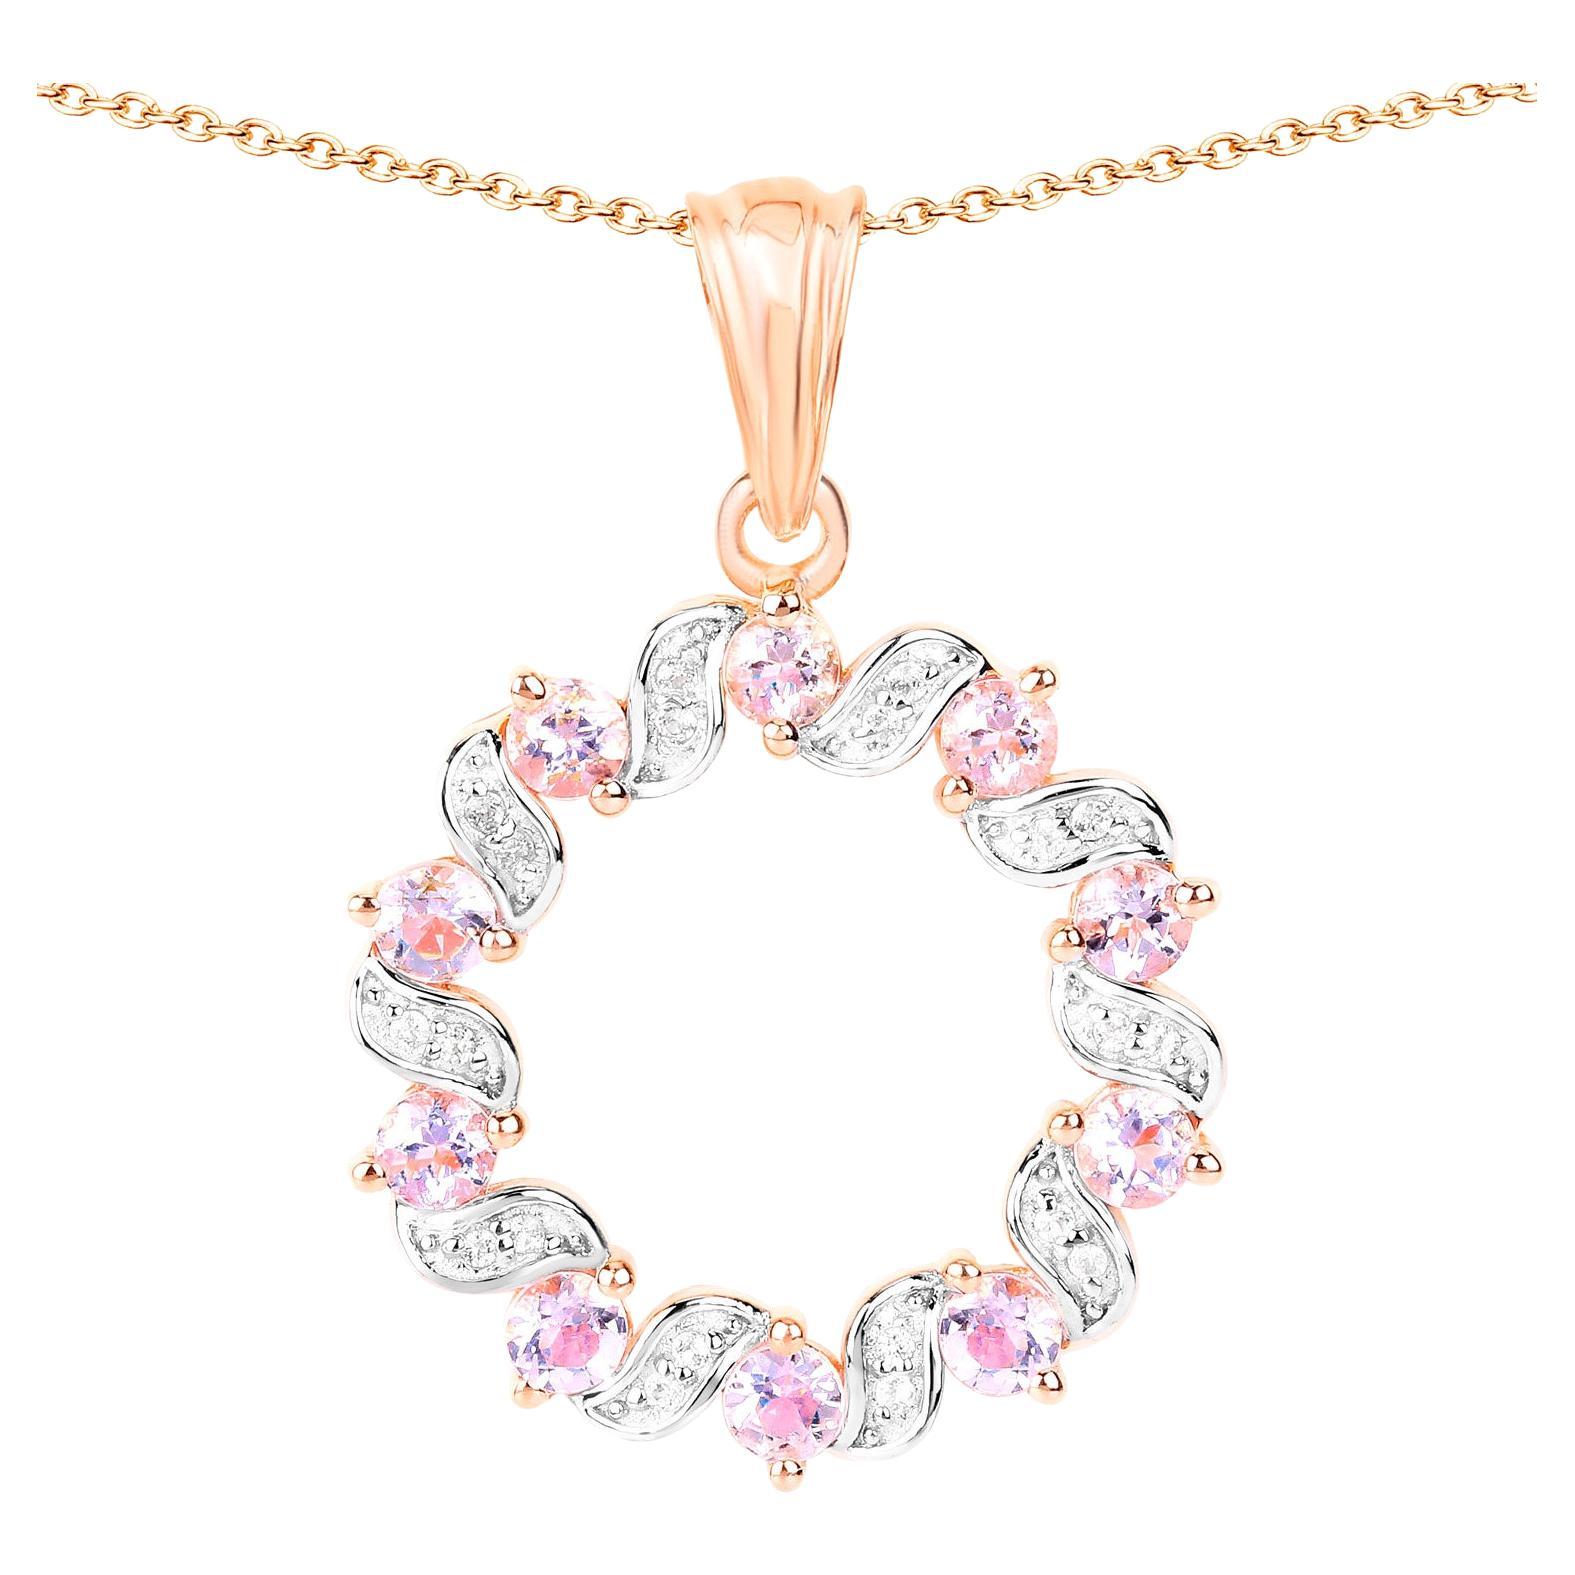 Morganite and Topaz Circle Pendant Necklace 1.1 Carats 18K Rose Gold Plated